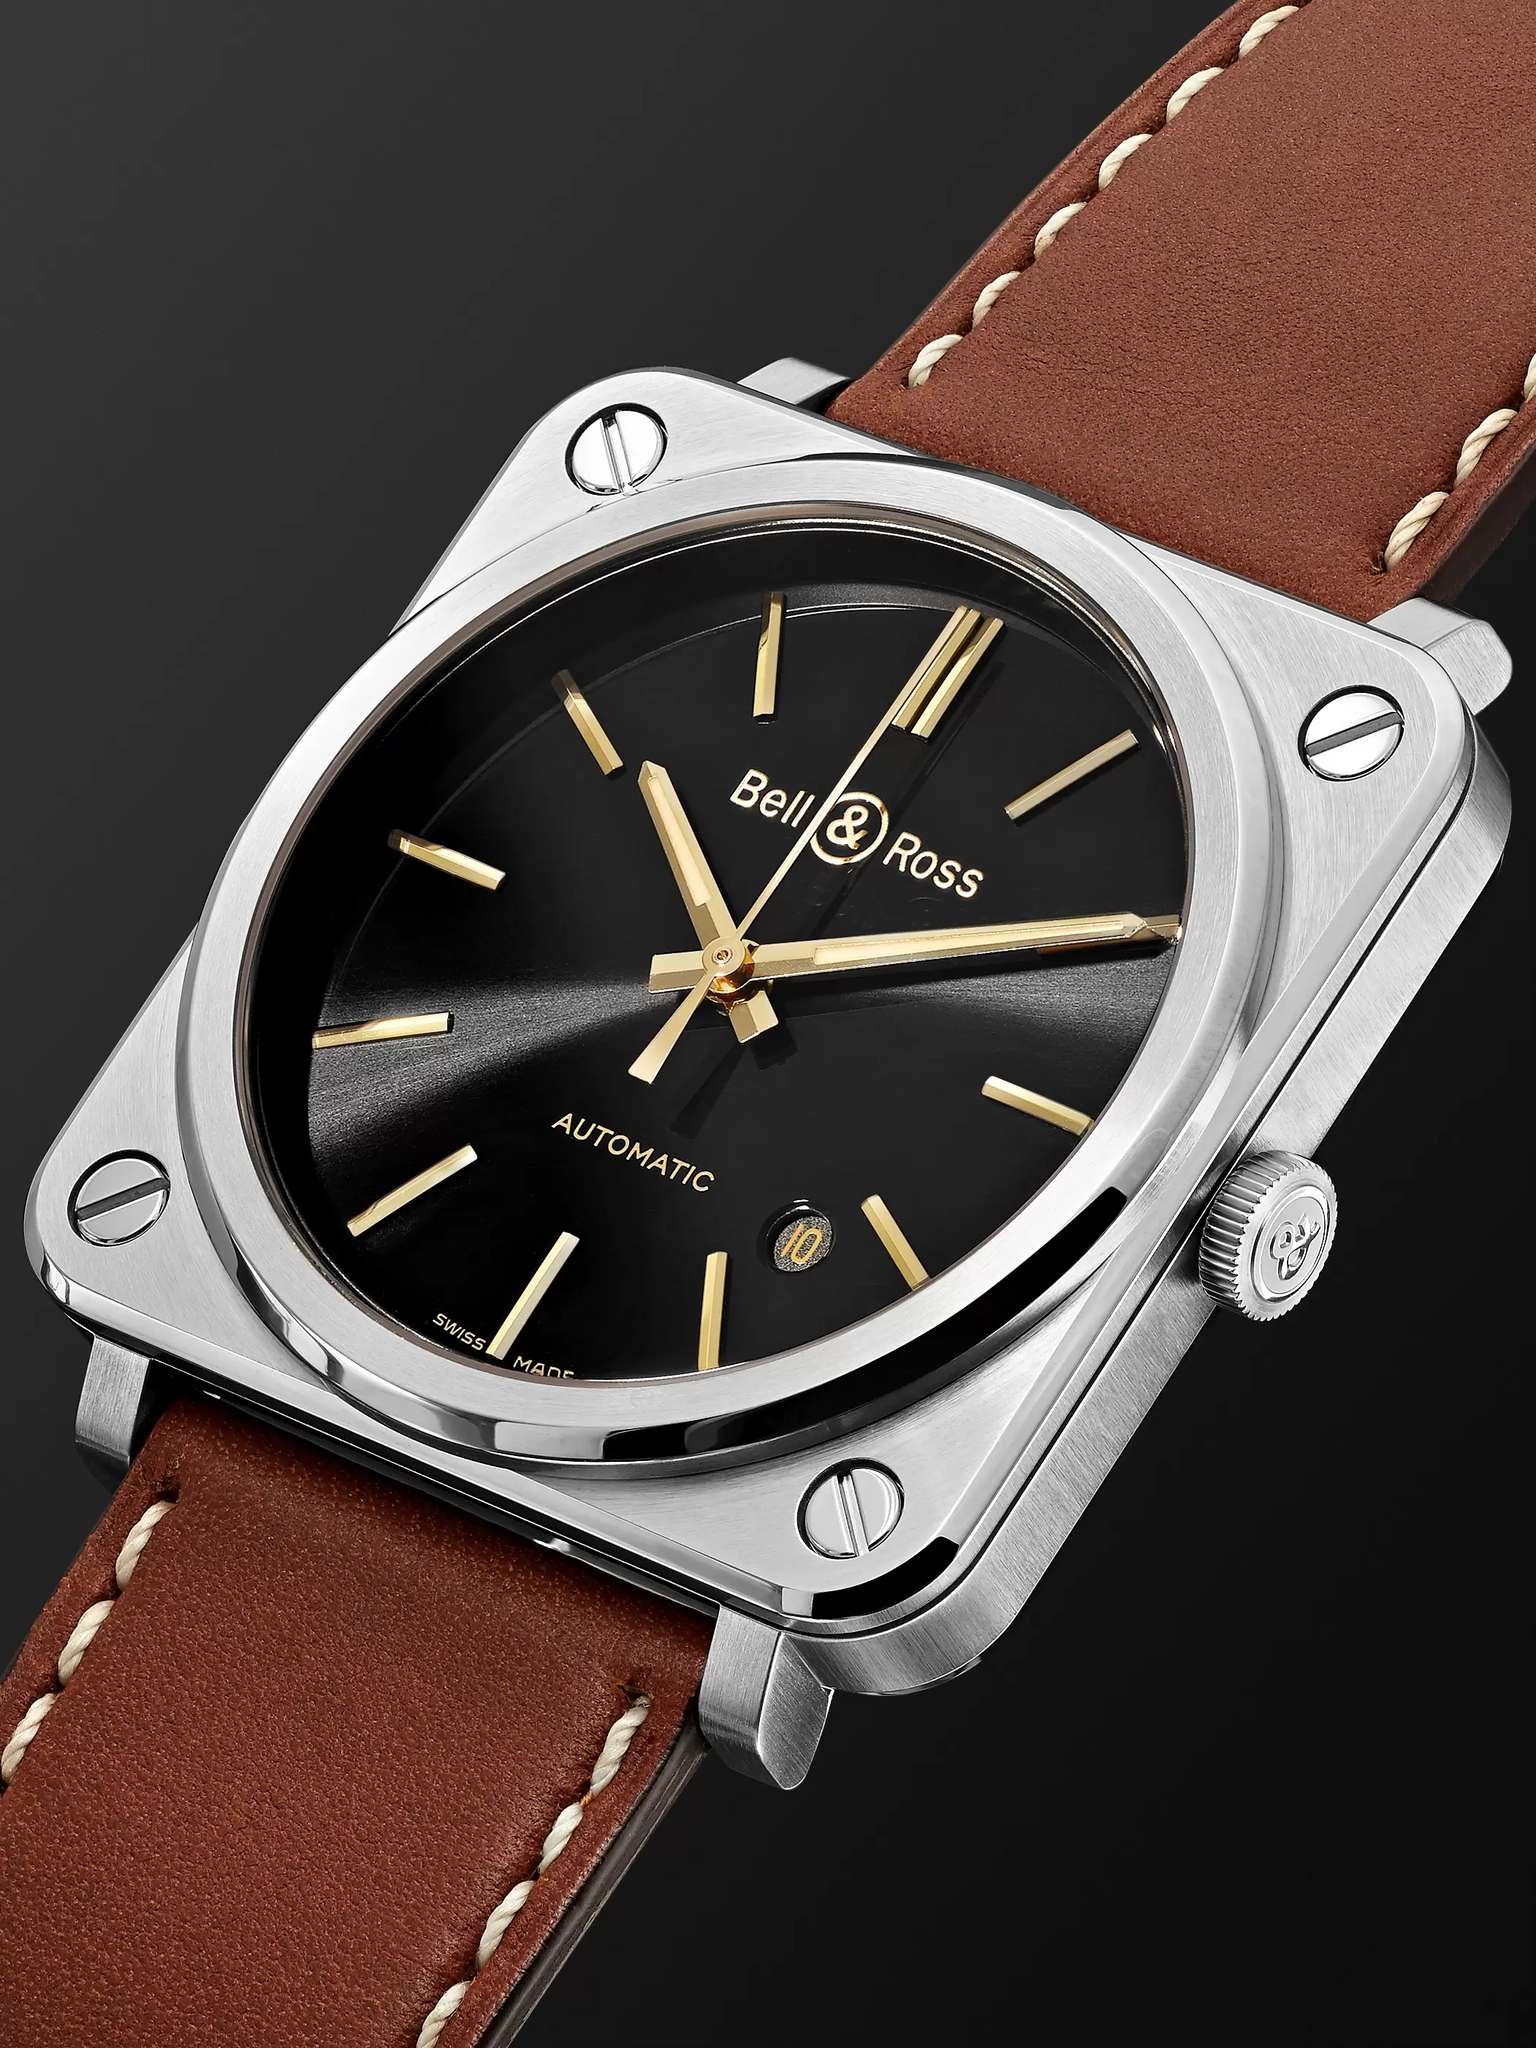 BR S-92 Golden Heritage Automatic 39mm Stainless Steel and Leather Watch, Ref. No. BRS92-ST-G-HE/SCA - 4